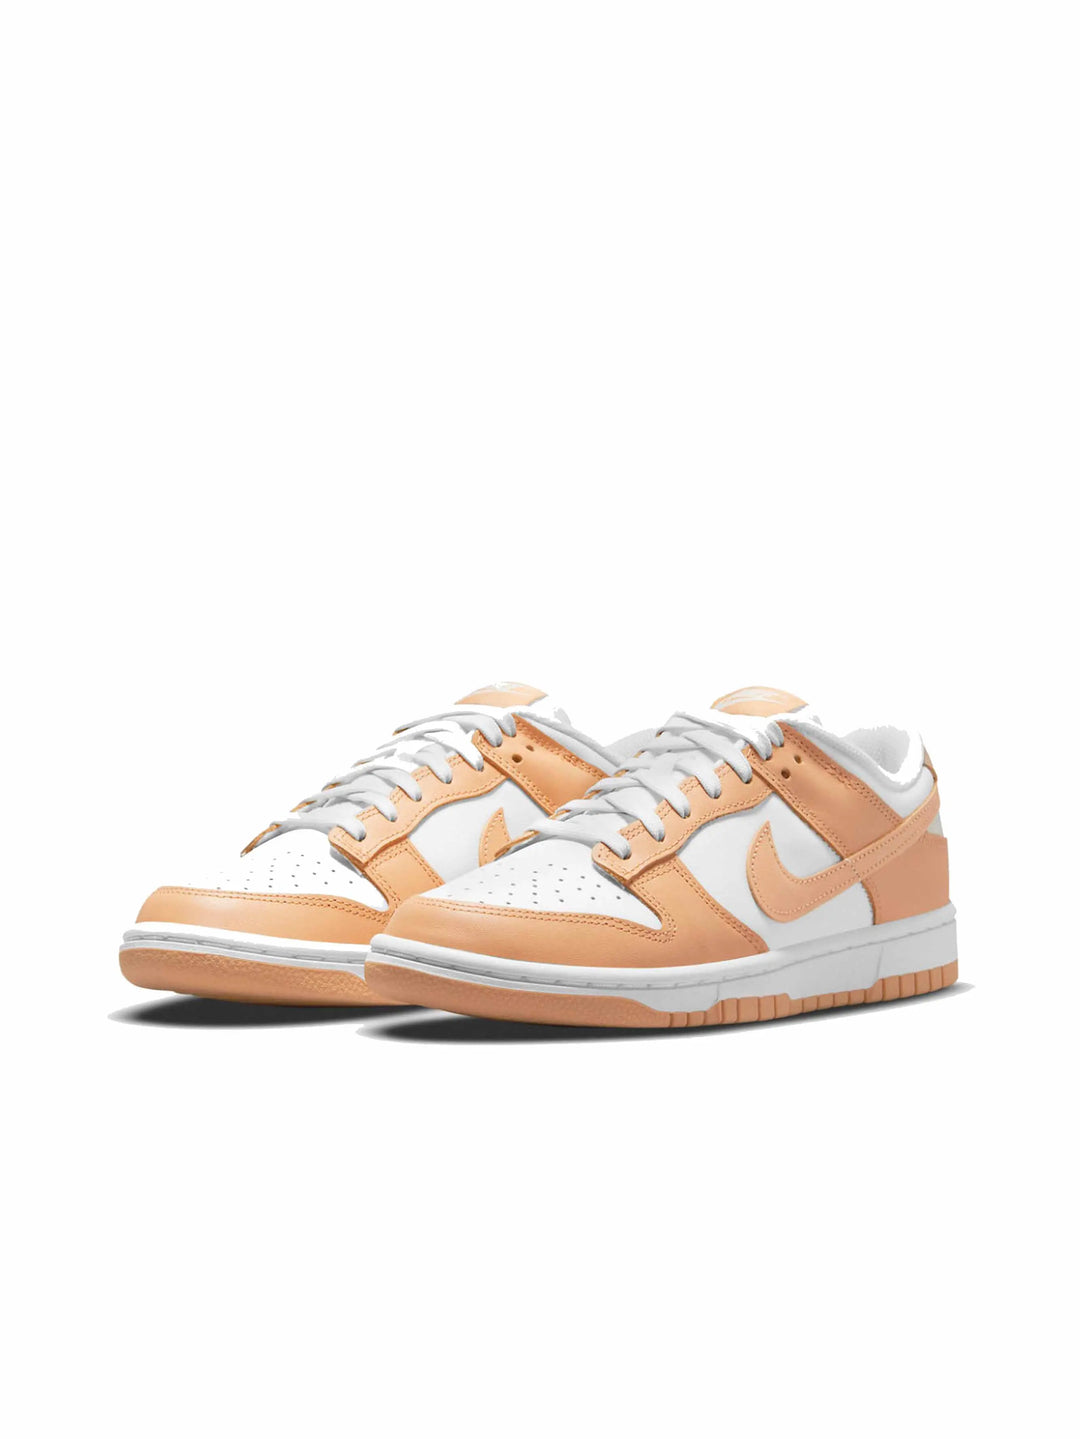 Nike Dunk Low Harvest Moon (W) - Prior